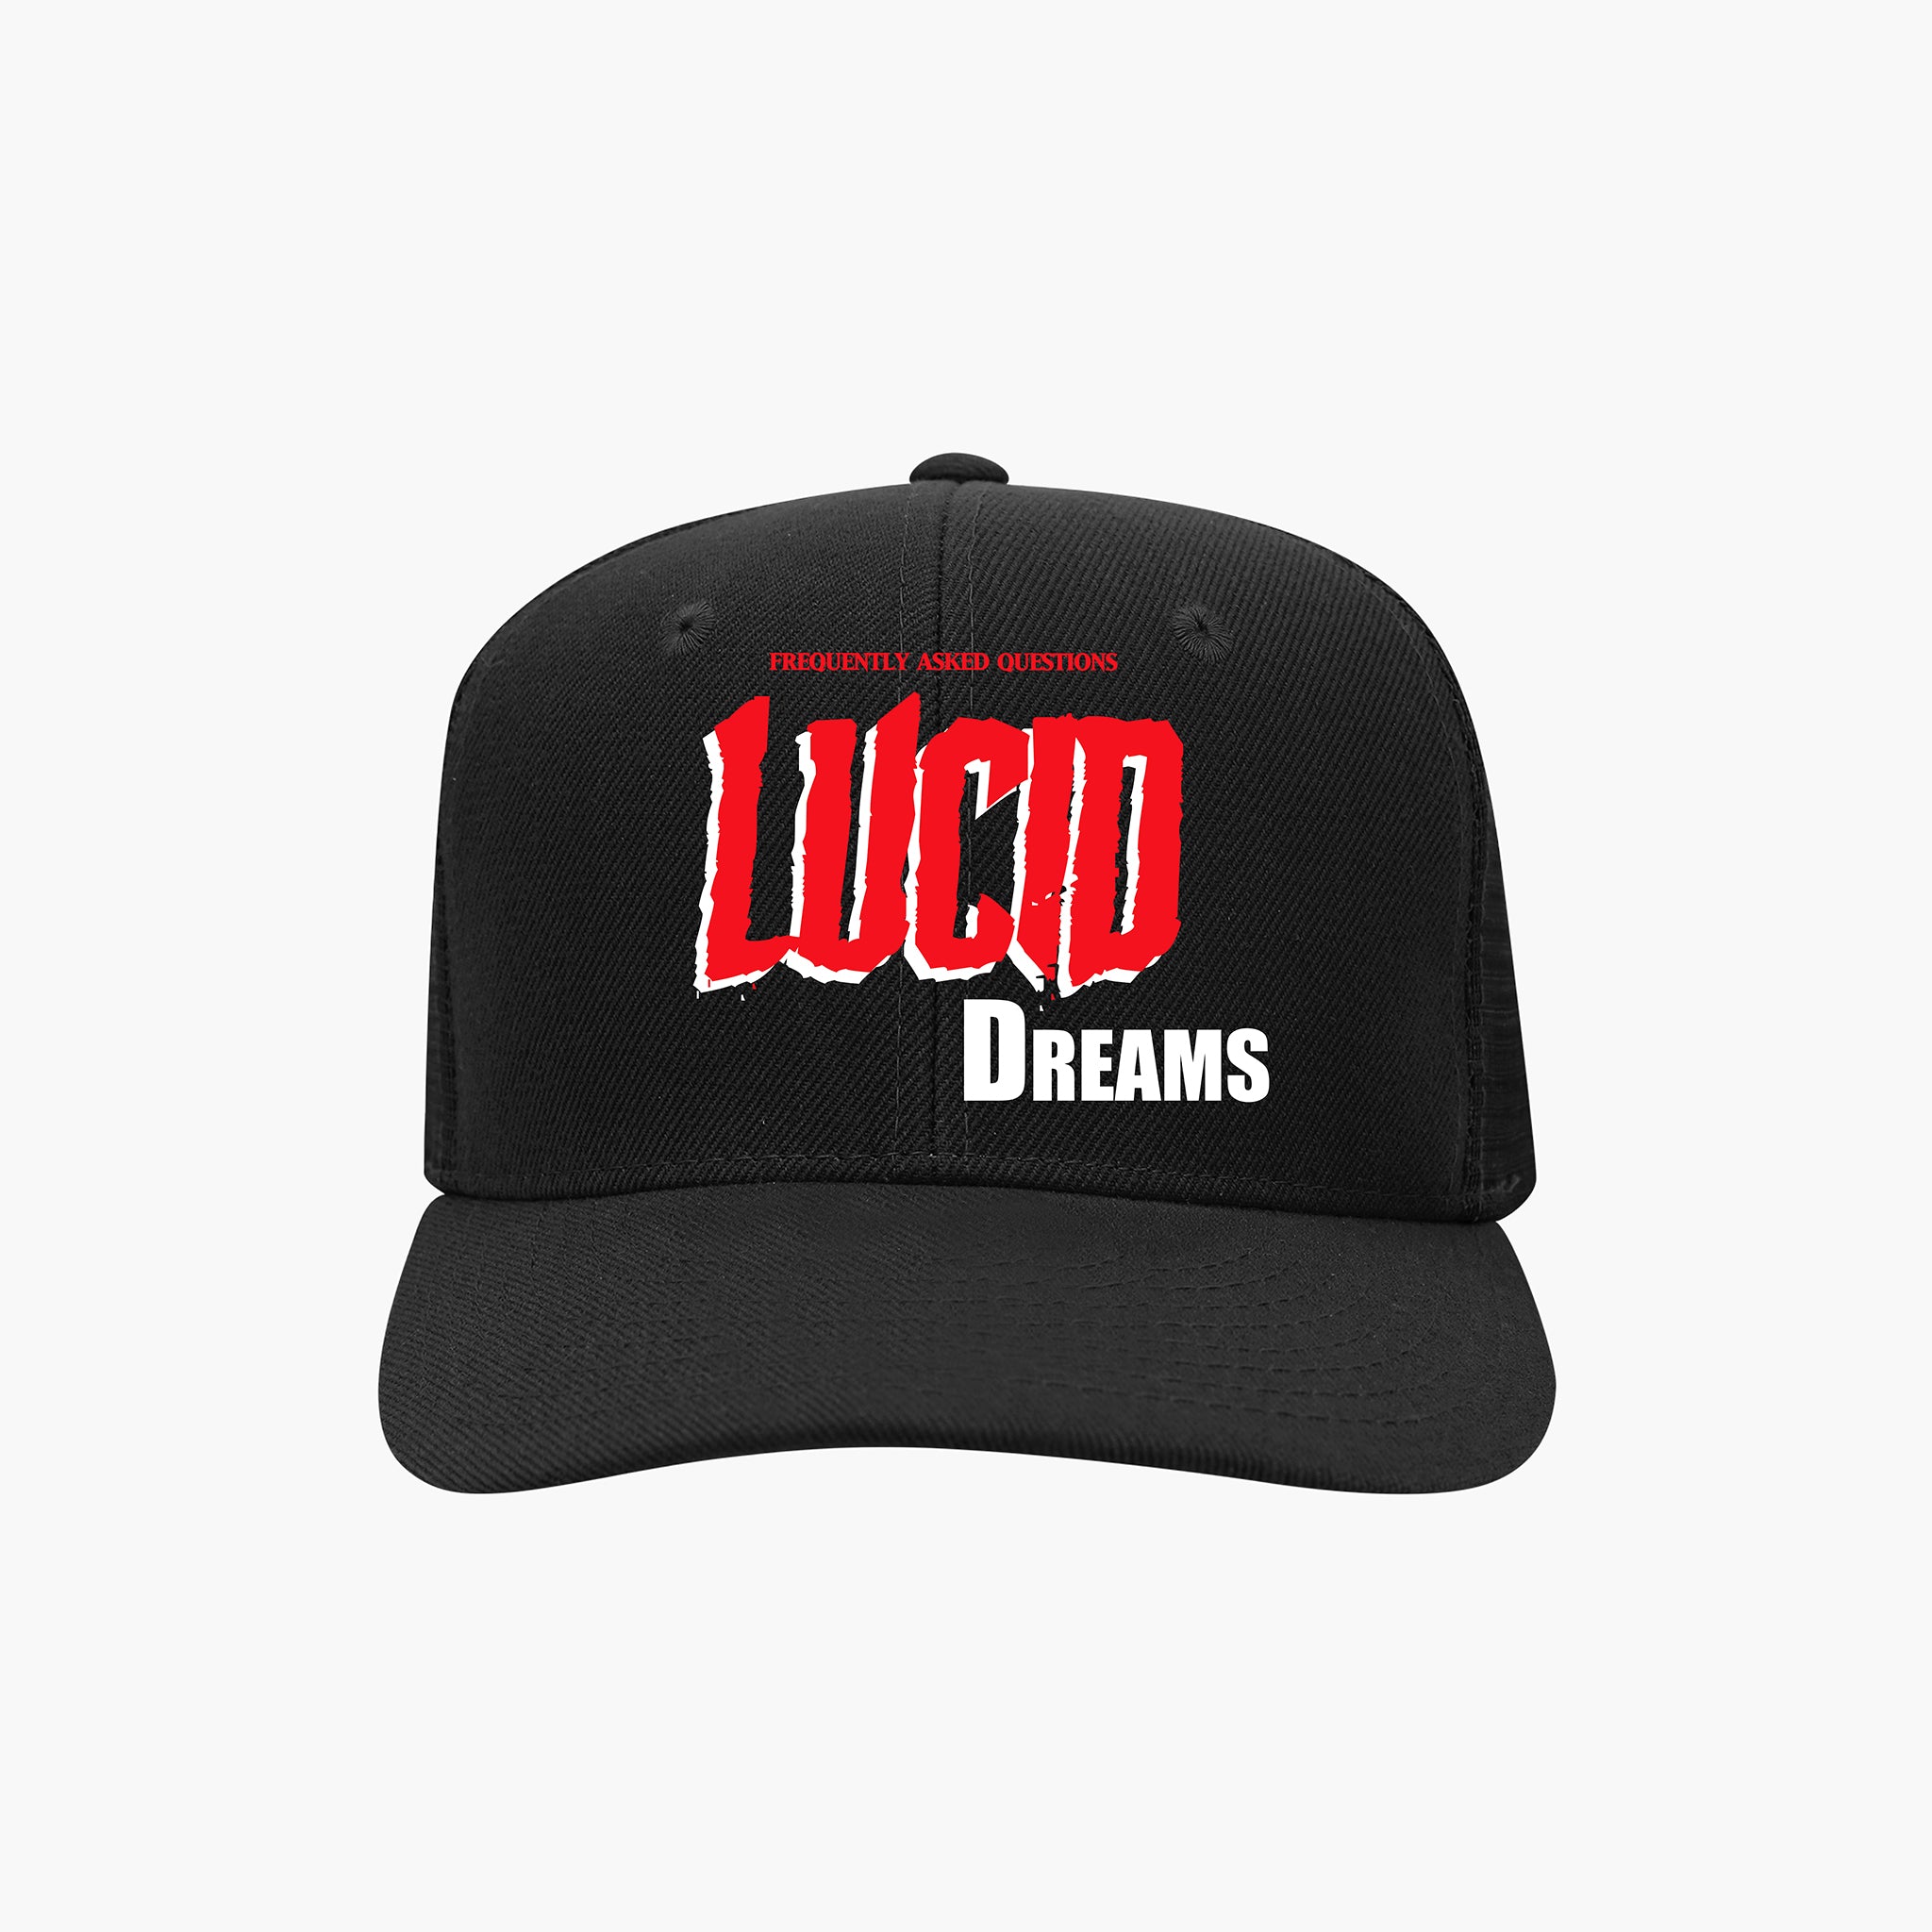 Lucid Dreams Trucker Hat - Frequently Asked Questions